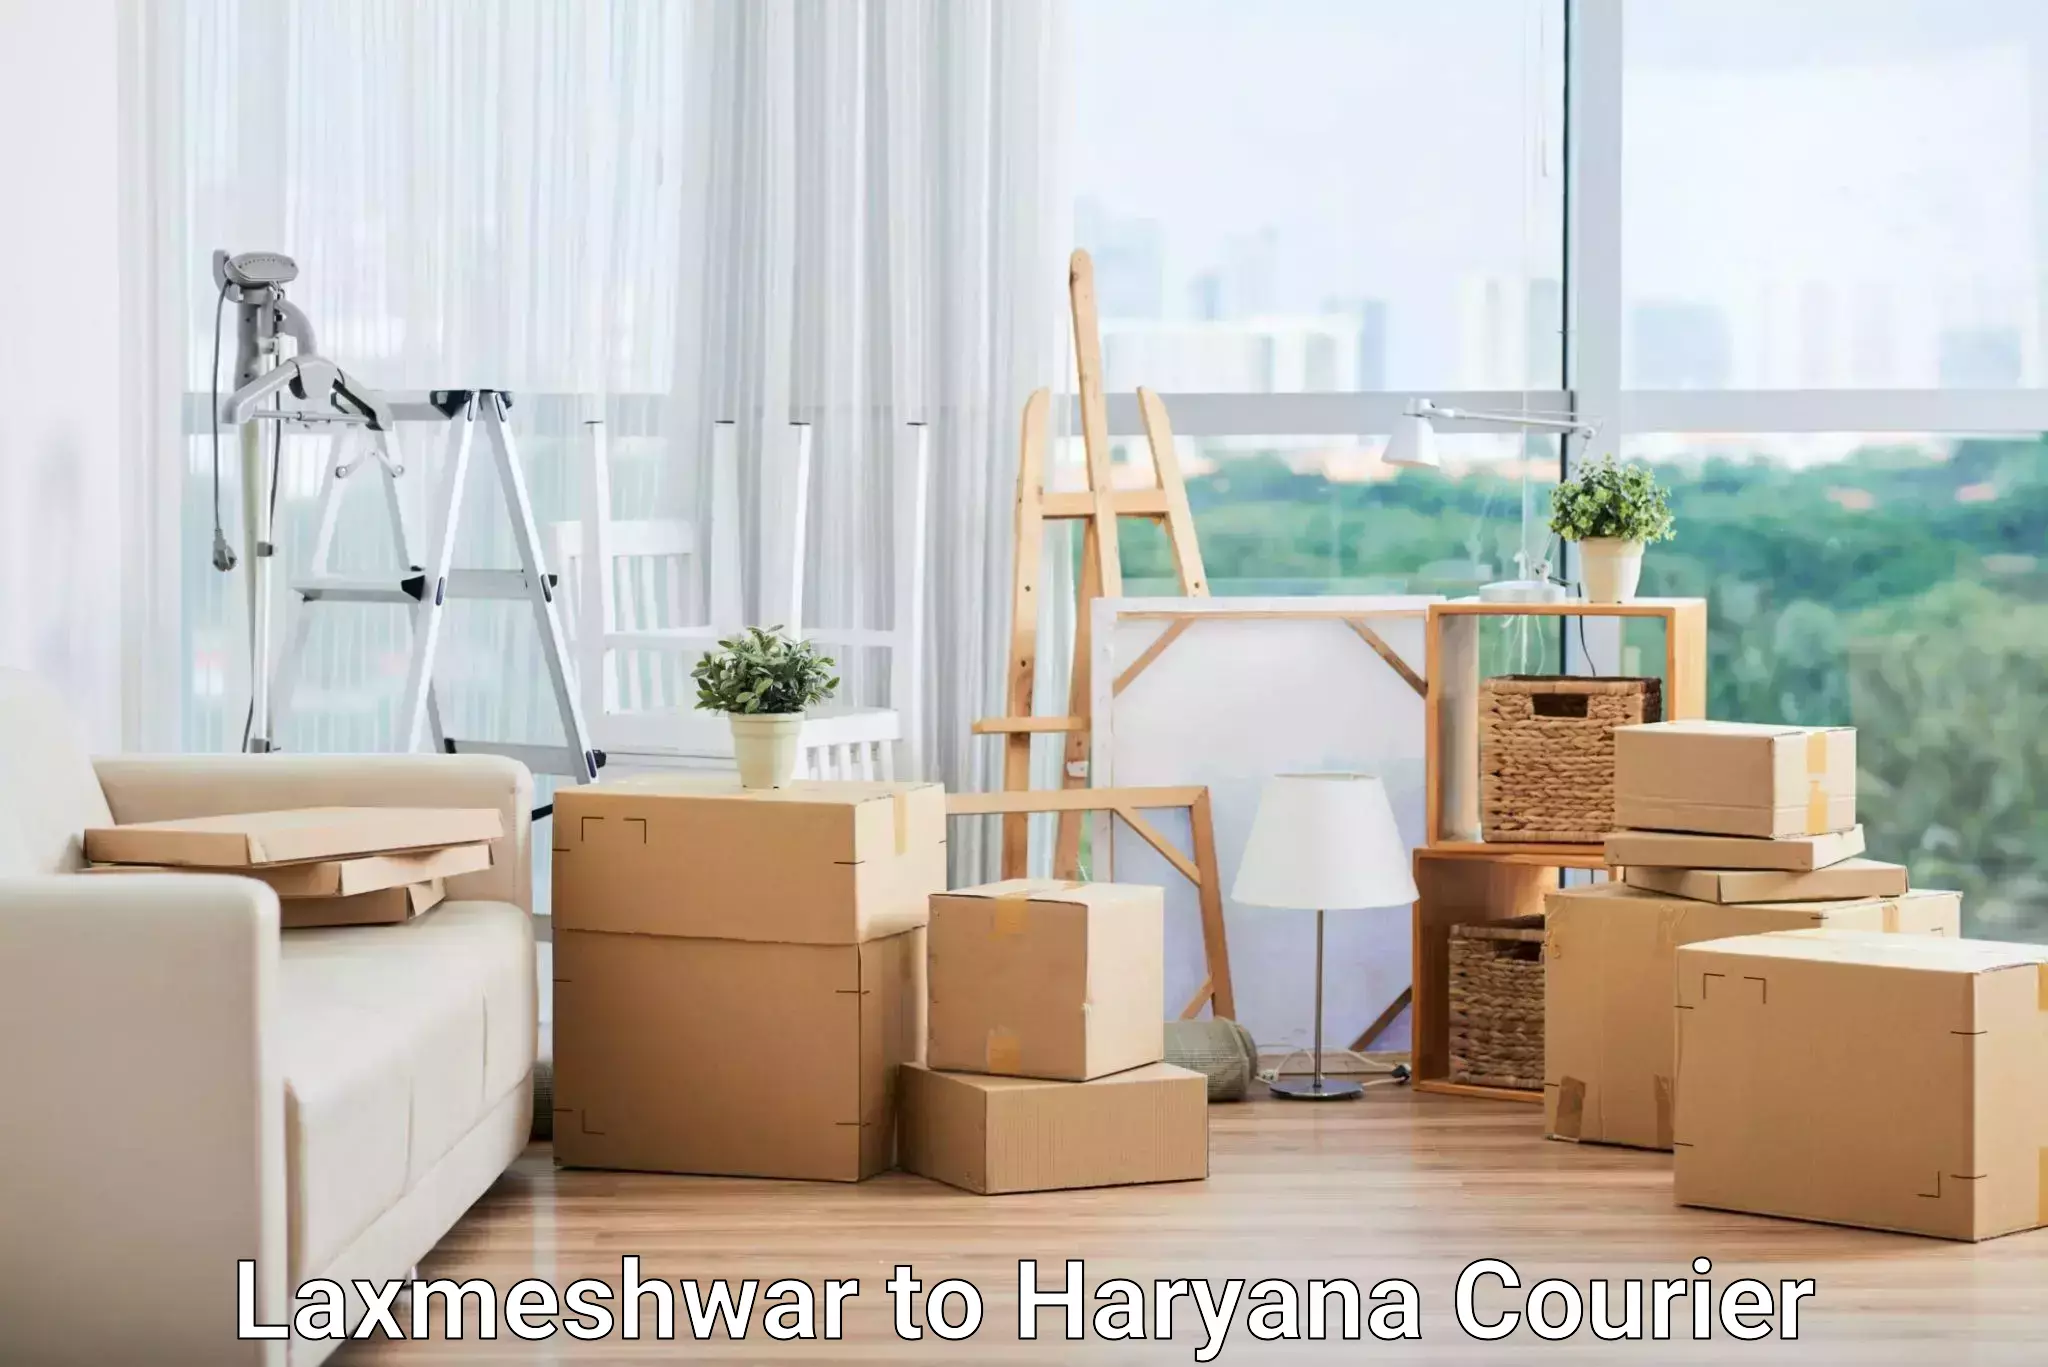 Customer-oriented courier services Laxmeshwar to NCR Haryana